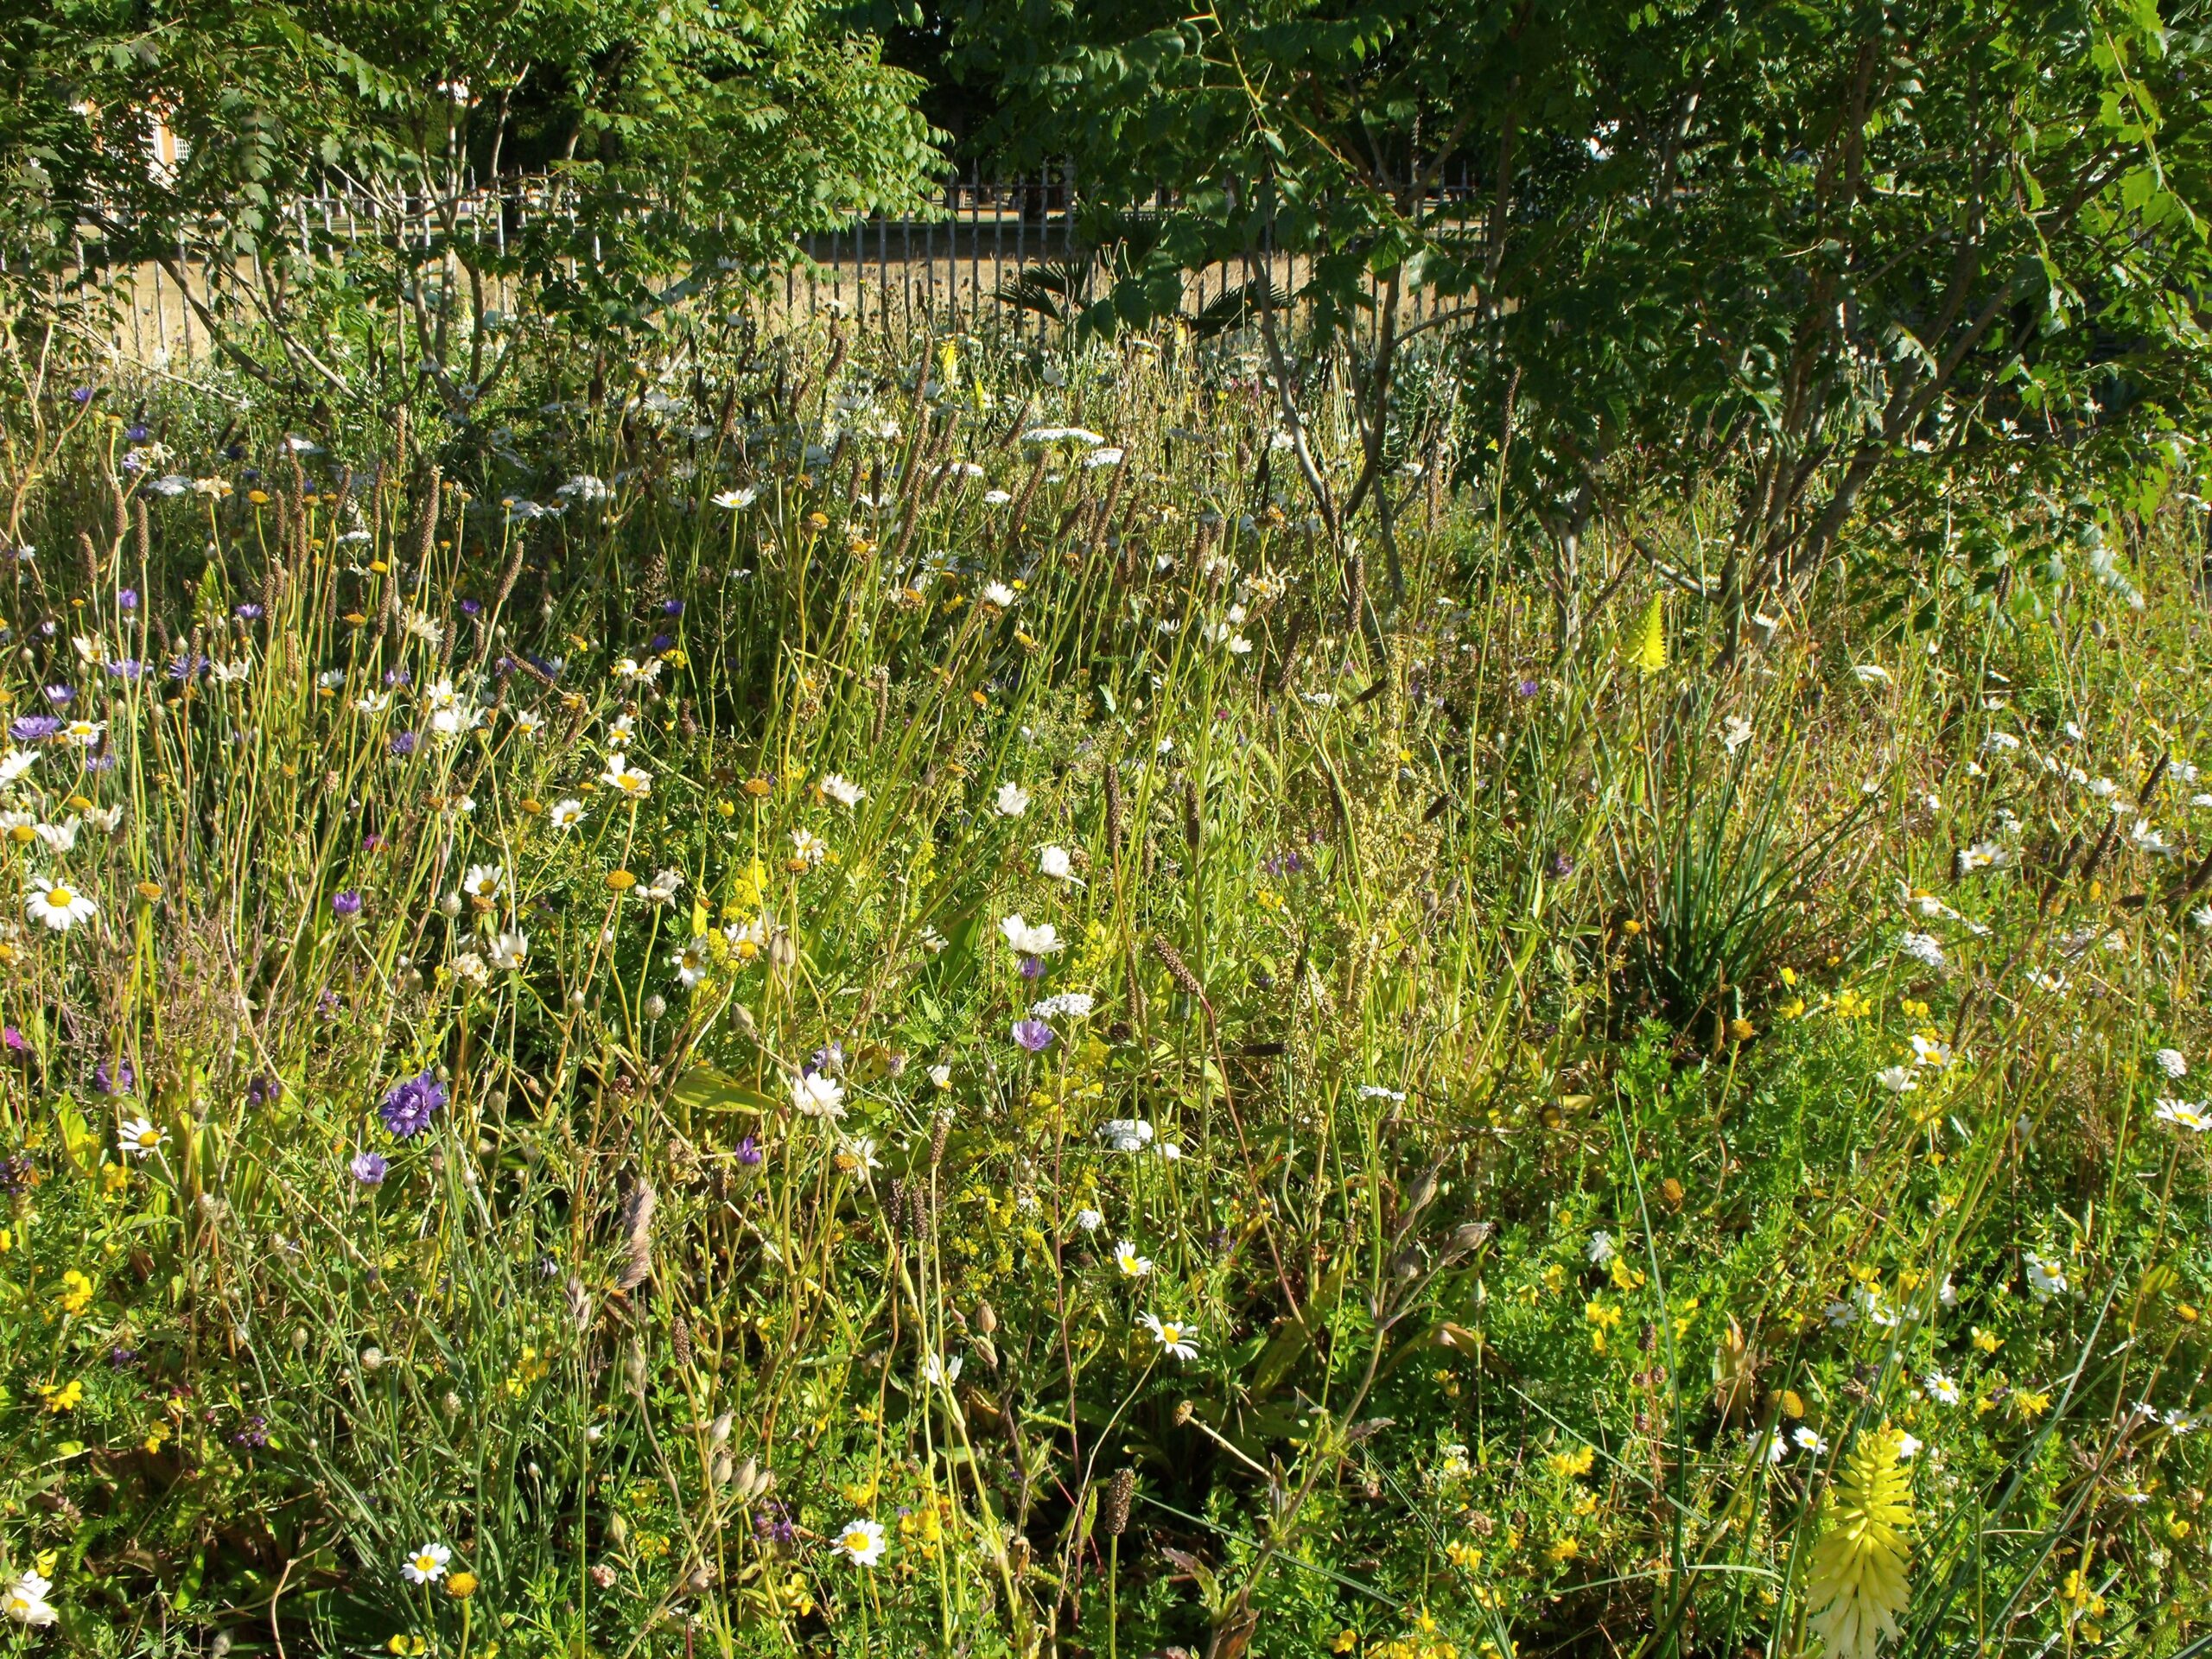 Naturalised flower garden at Hampton Court Flower show depicting a grassland with a few shrubs as trees